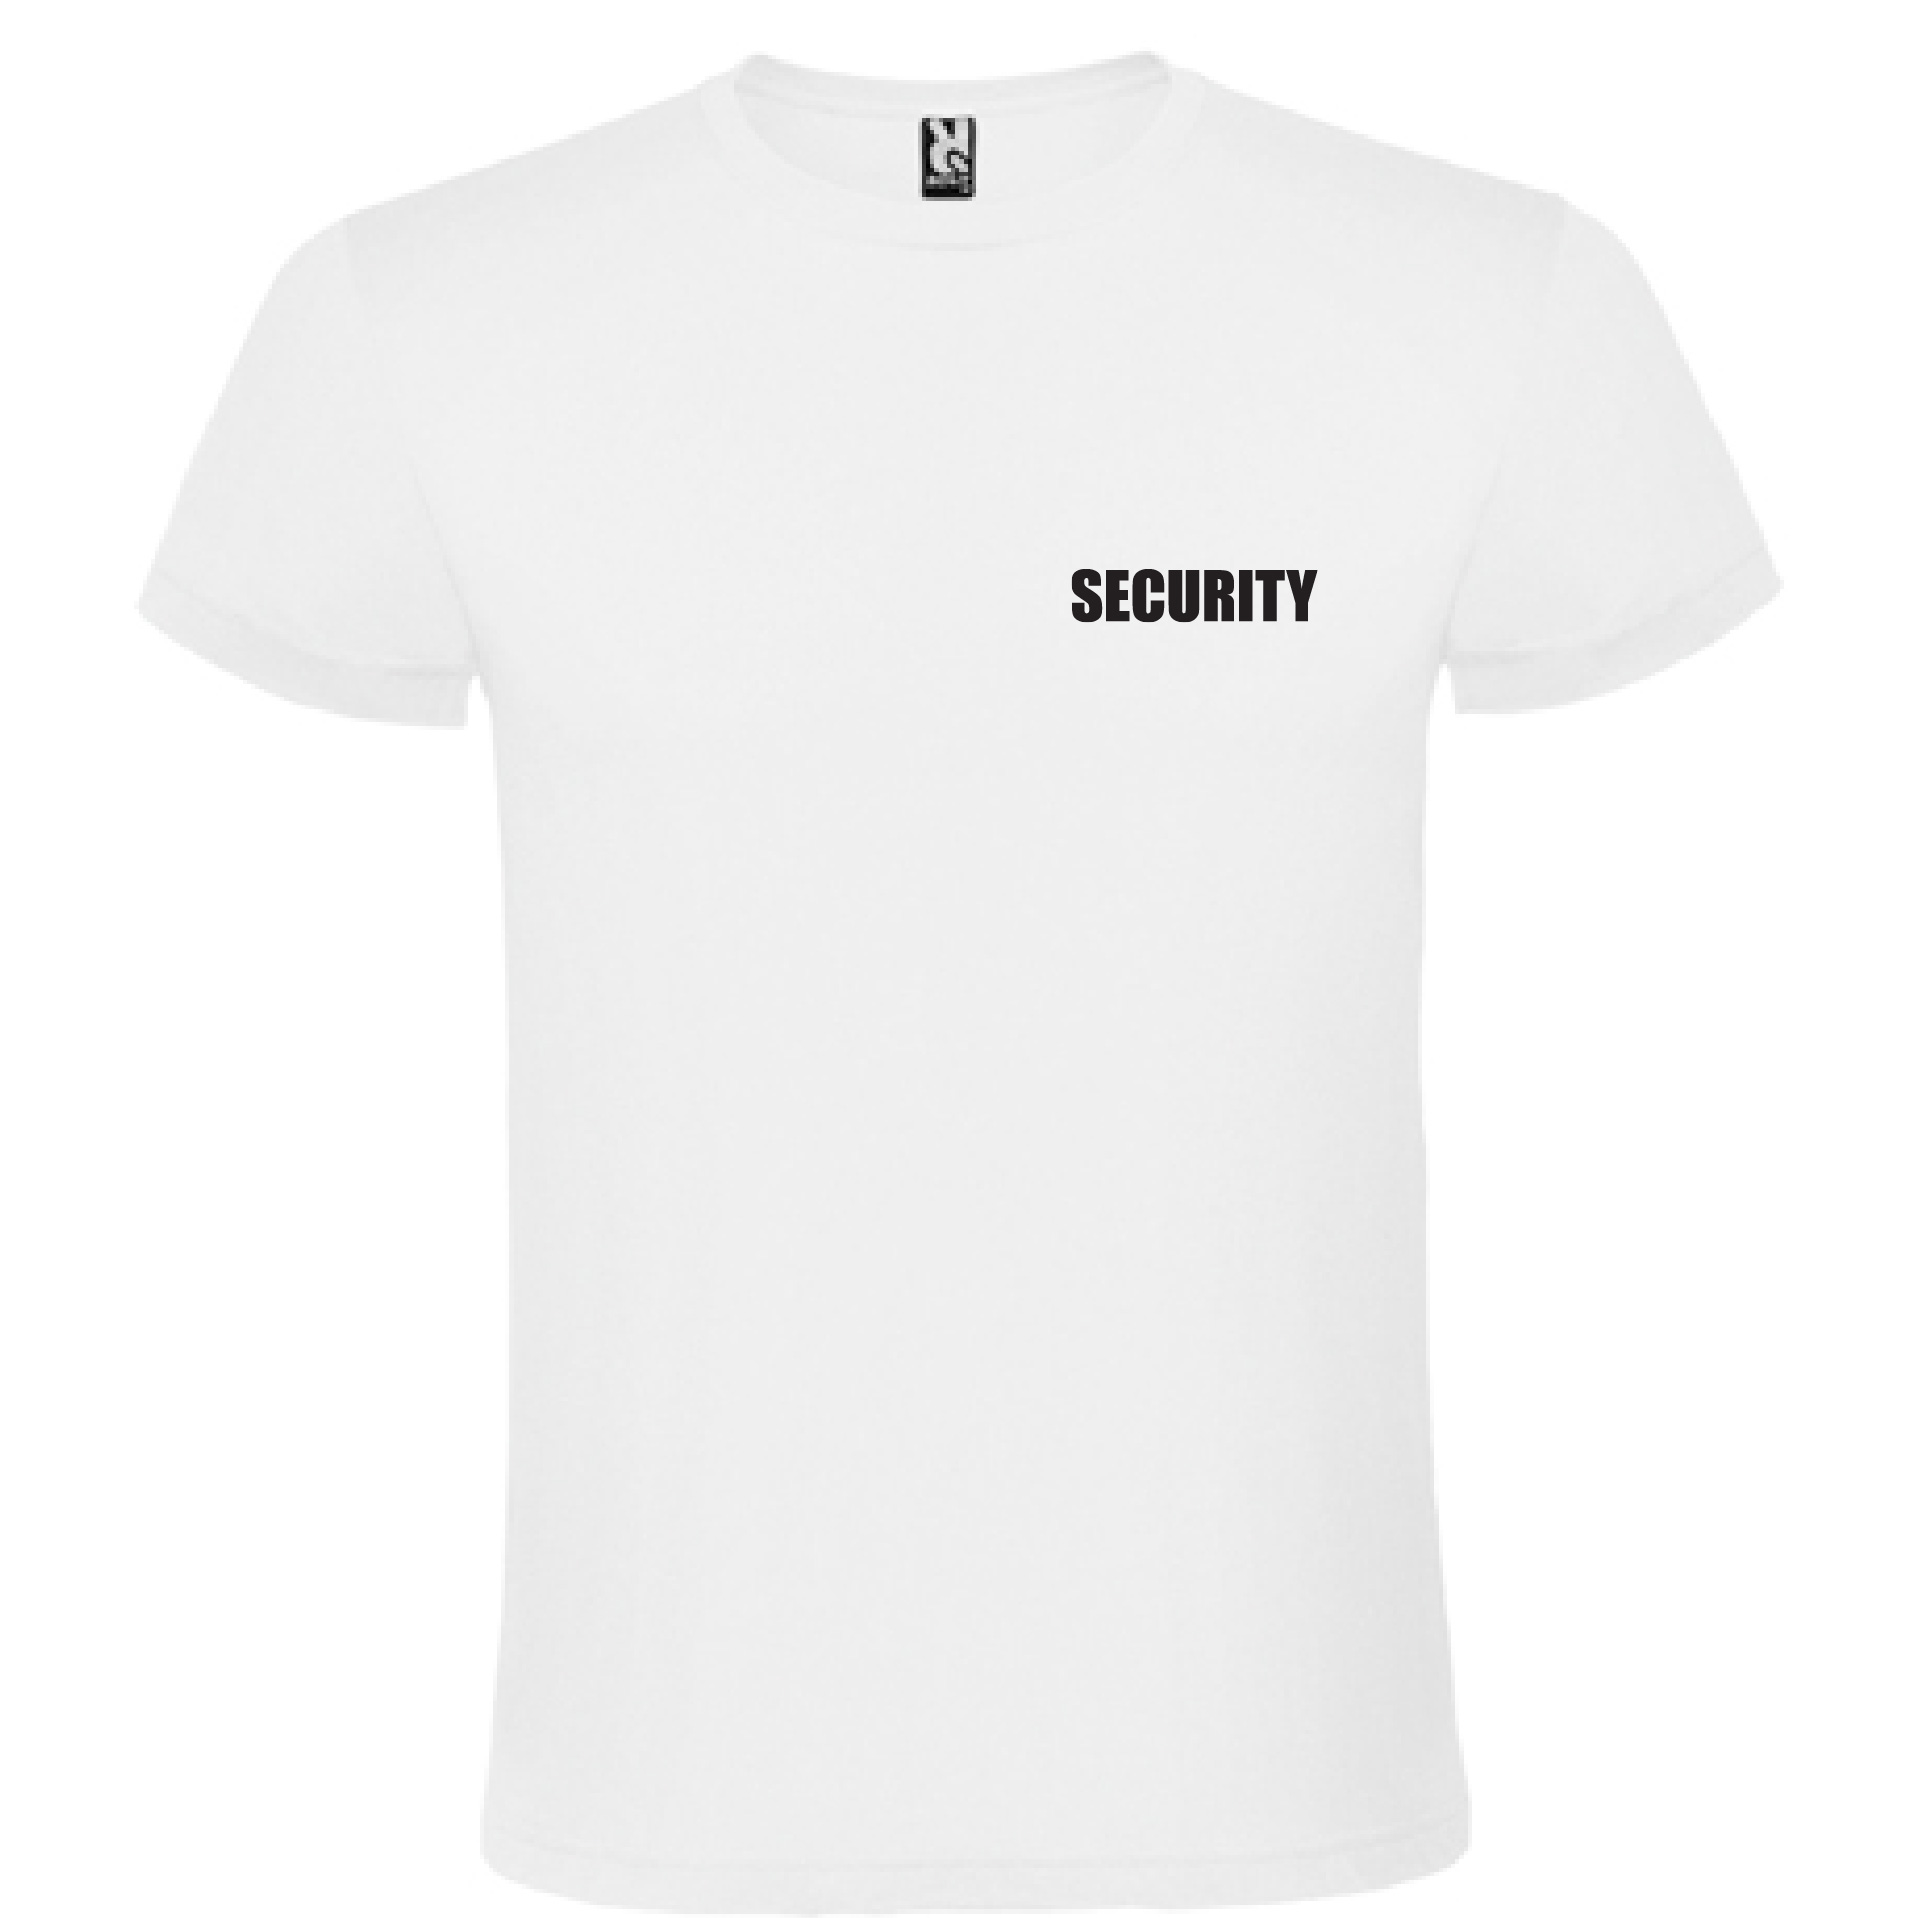 t-shirt_security_front_white.jpg